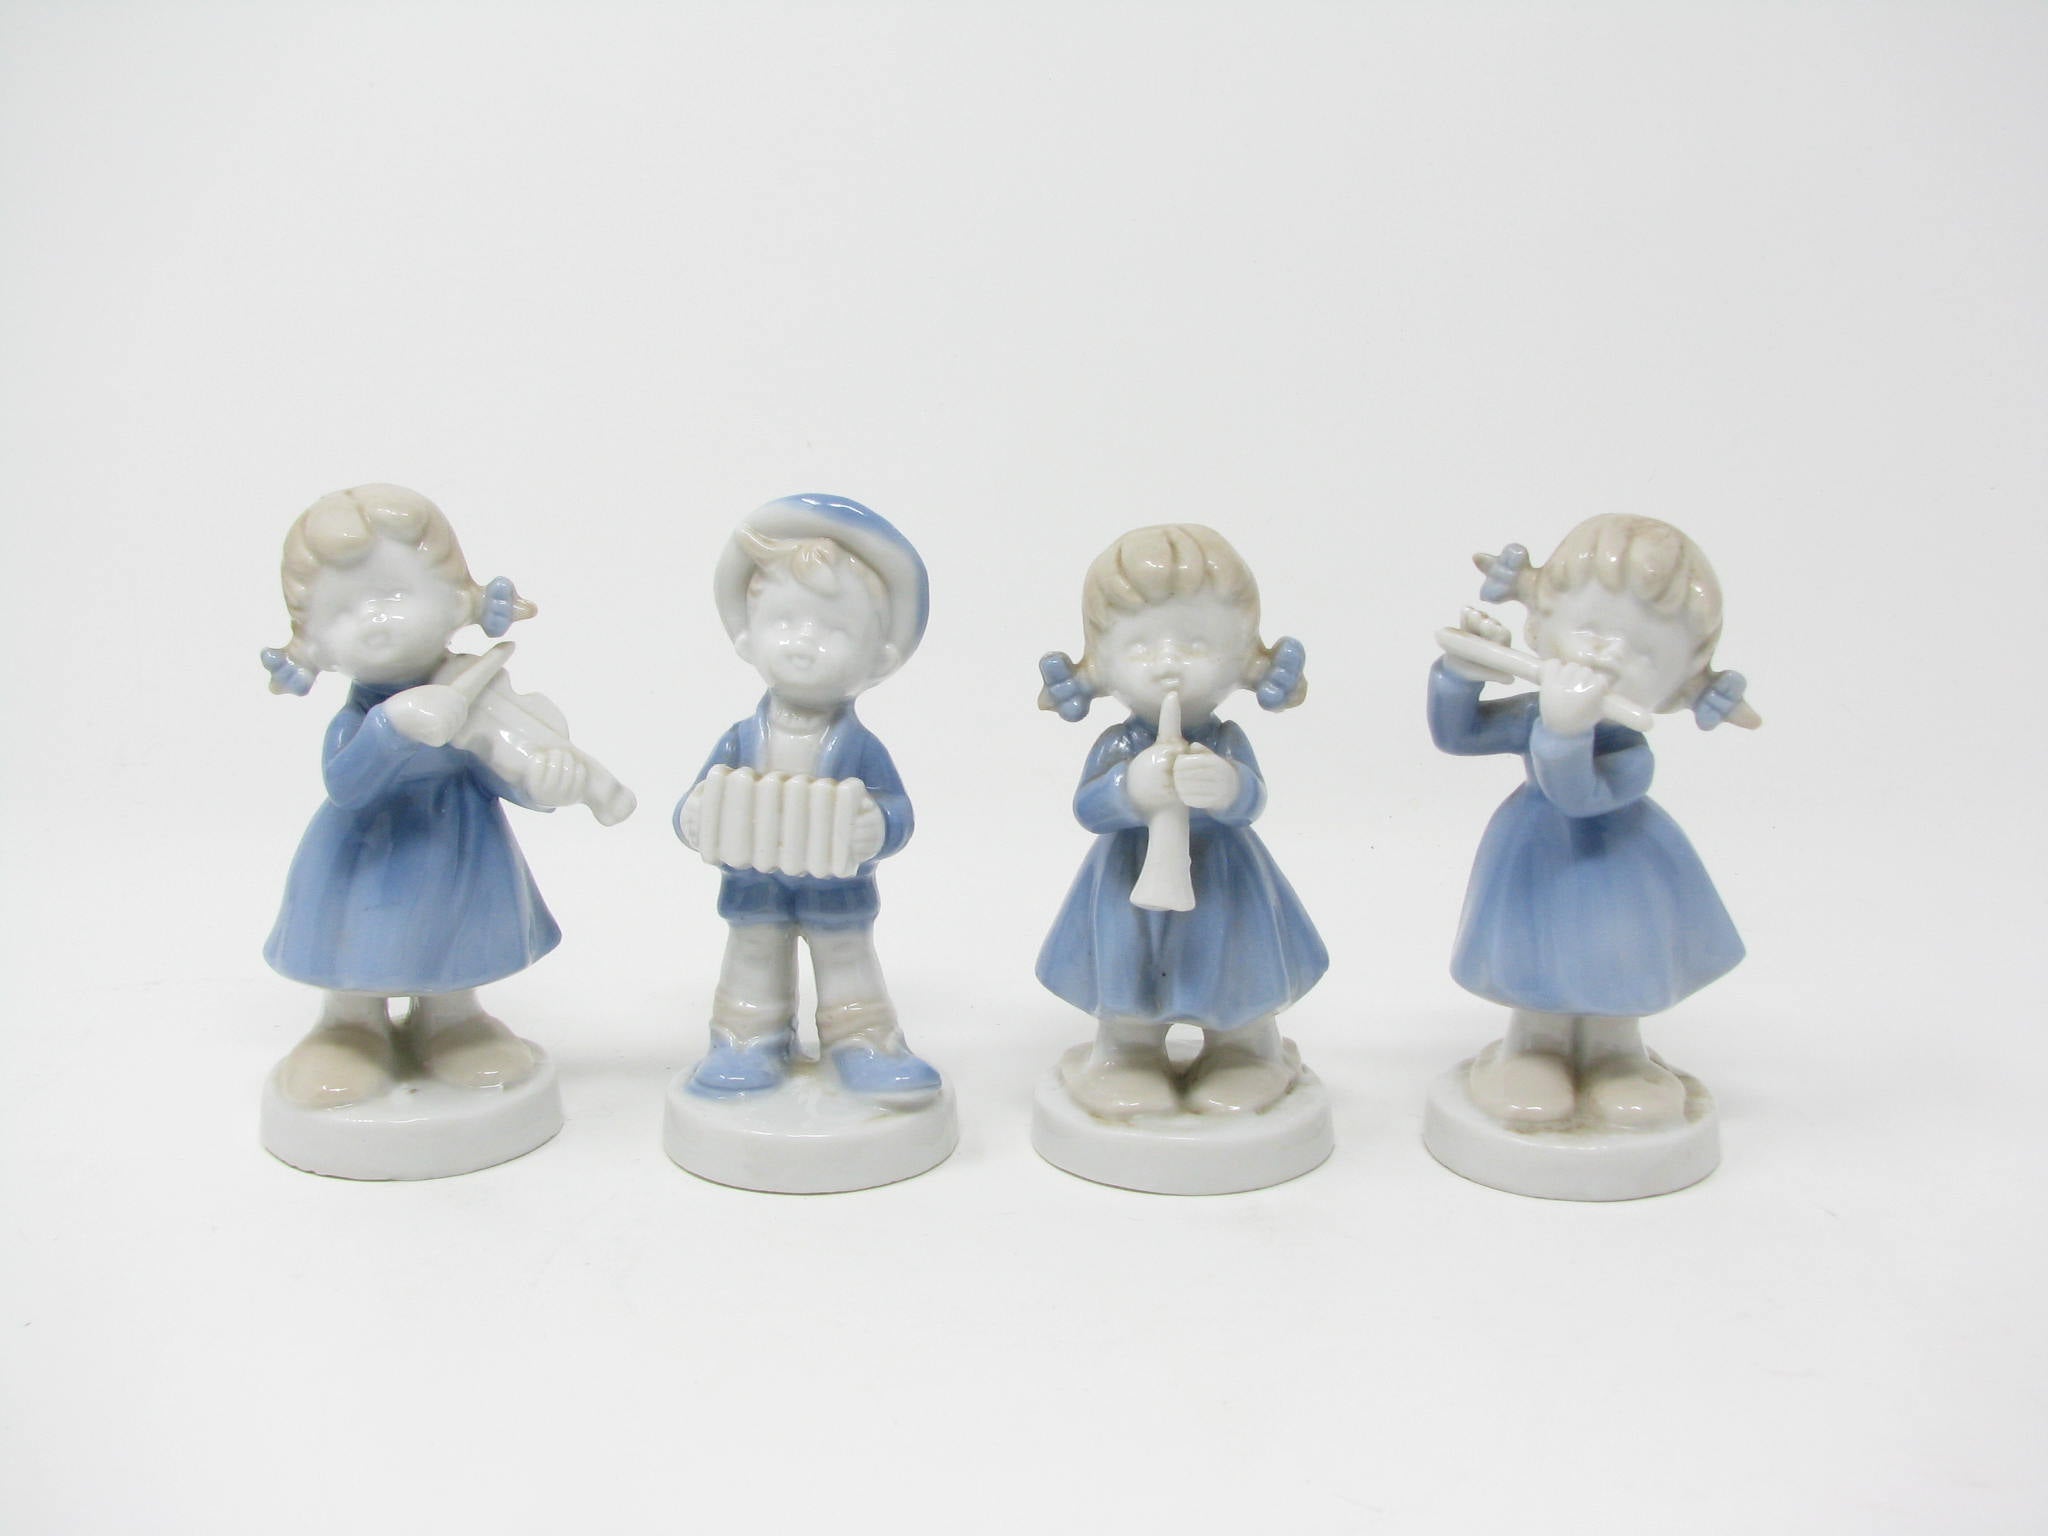 edgebrookhouse - Vintage Small Lego Japan Figurines of Children Playing Musical Instruments - 4 Pieces